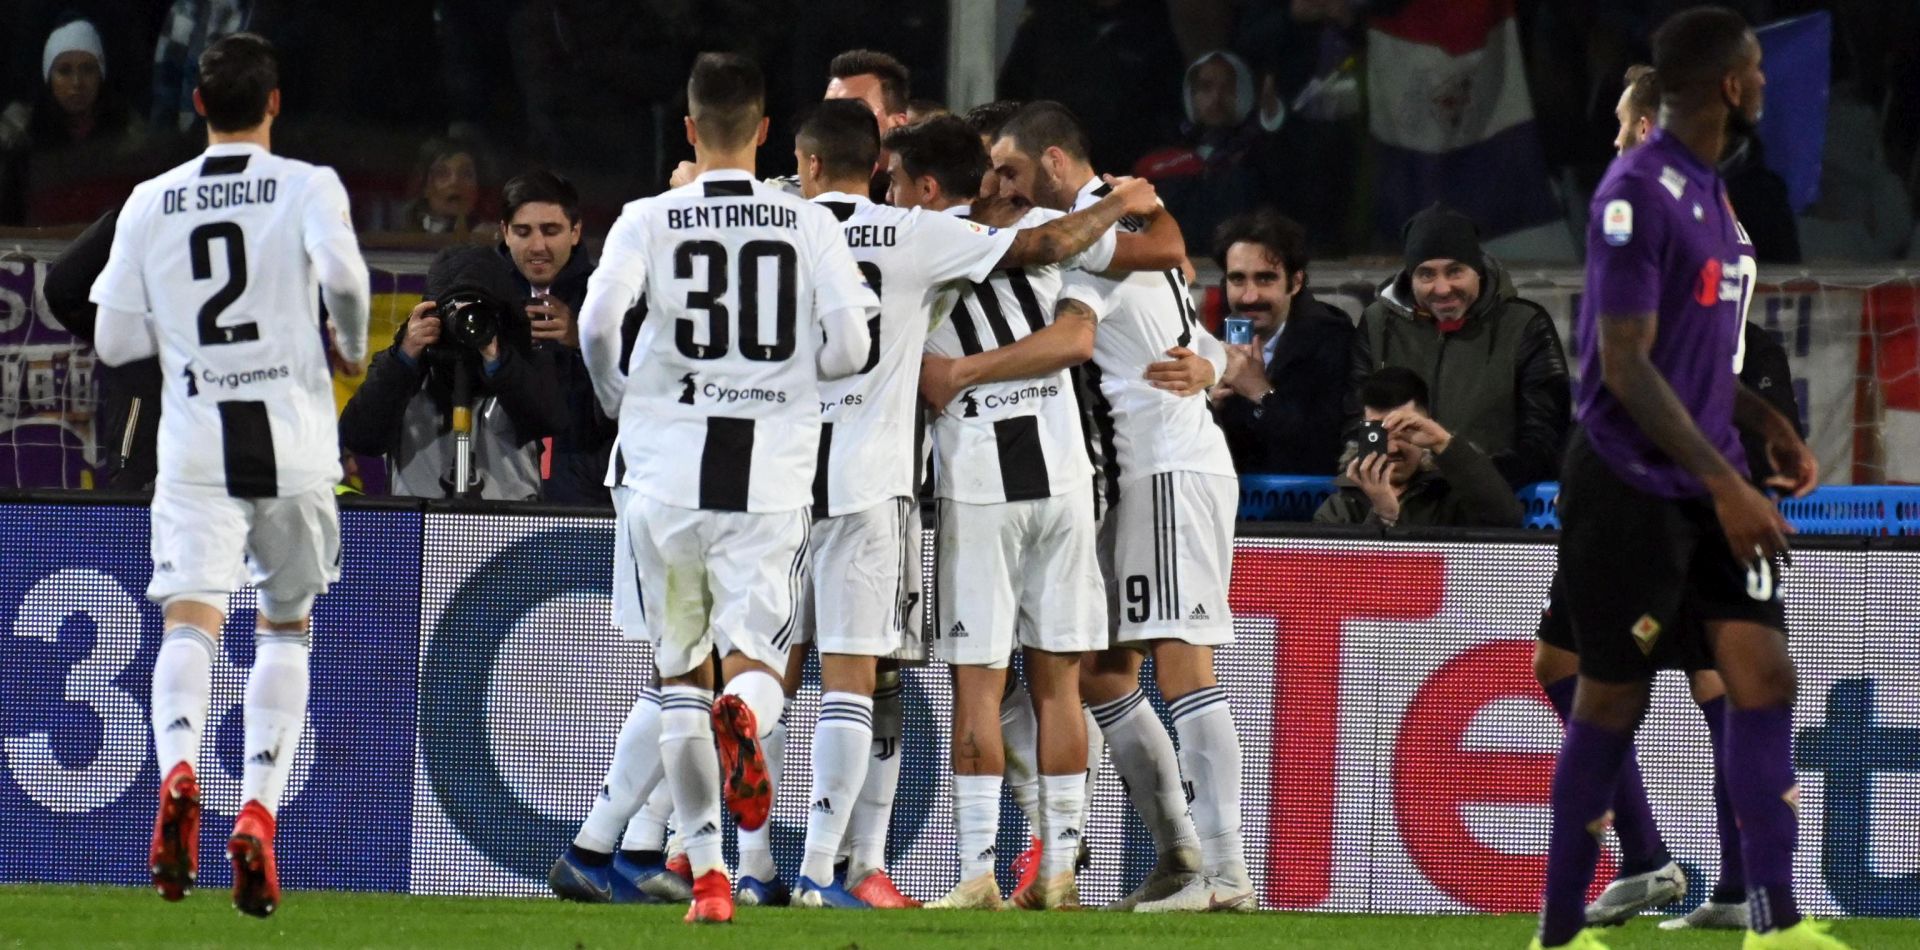 epa07202294 Juventus' players celebrate during the Italian Serie A soccer match between ACF Fiorentina and Juventus FC at the Artemio Franchi stadium in Florence, Italy, 01 December 2018.  EPA/CLAUDIO GIOVANNINI